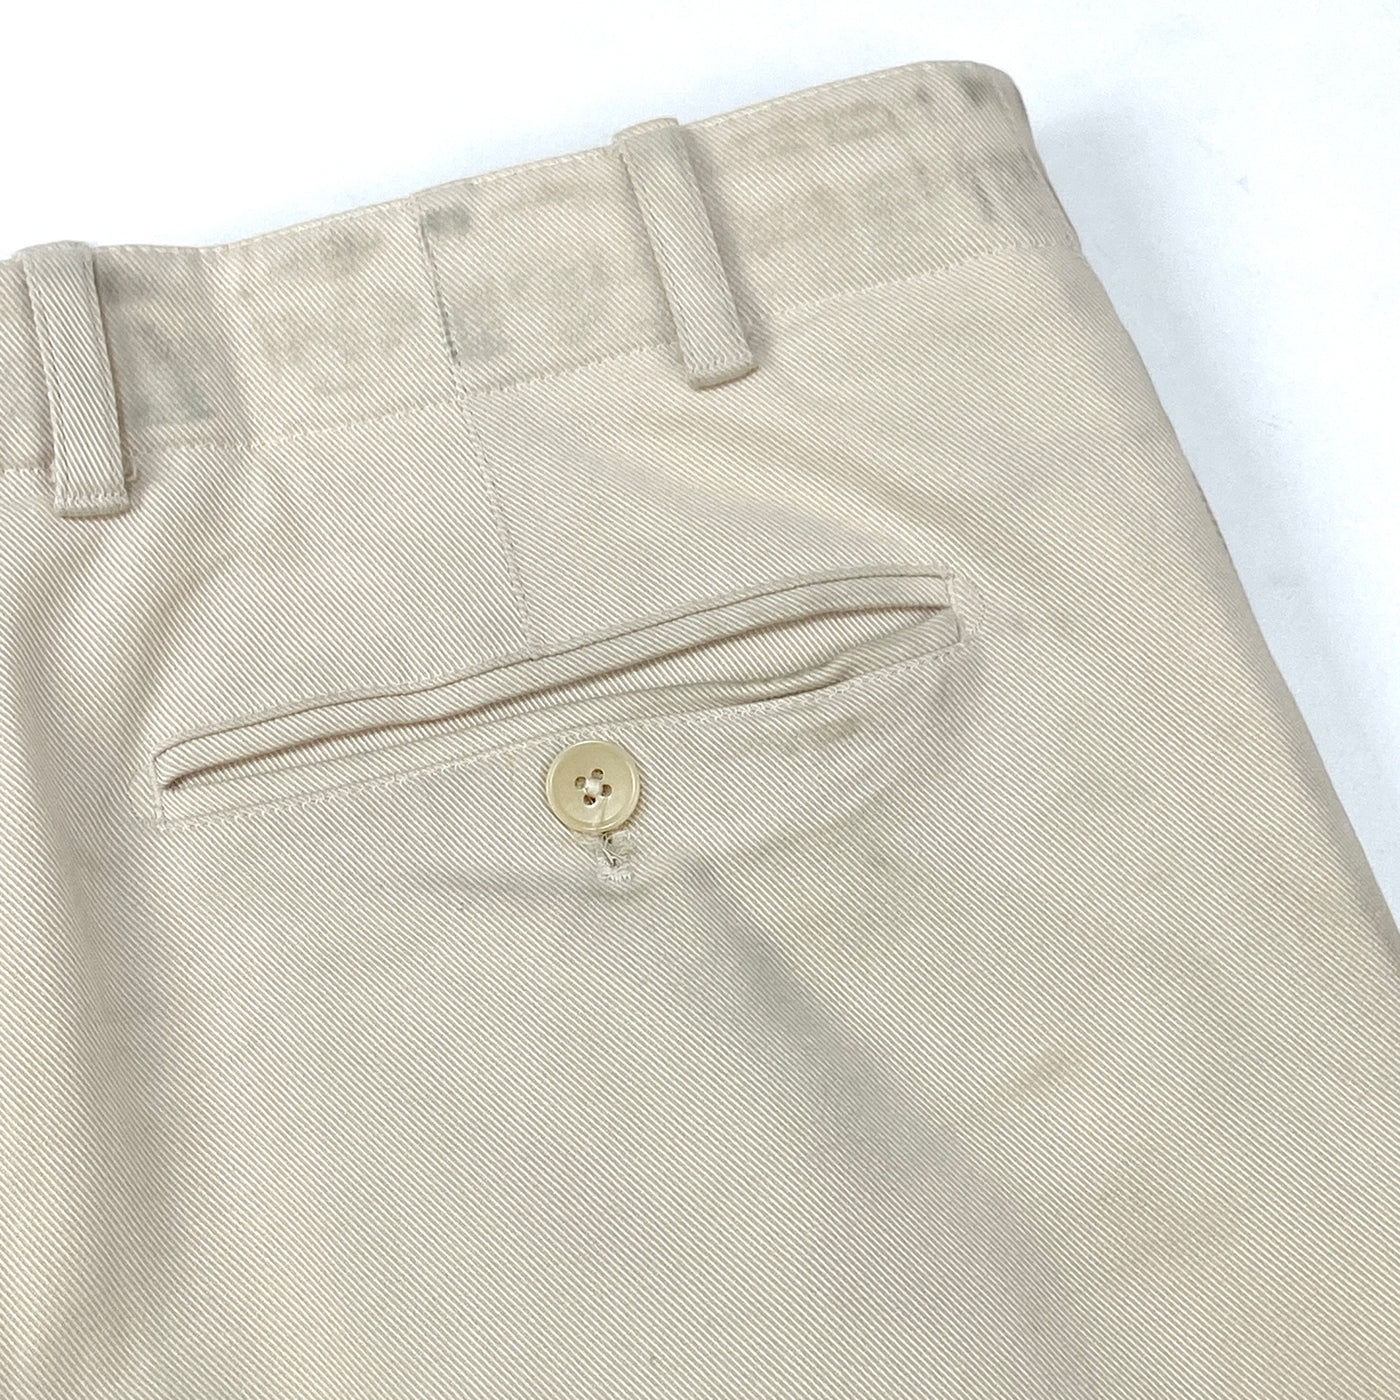 2020AW Seoul Pants With Pleats PP33/091 04520000 40